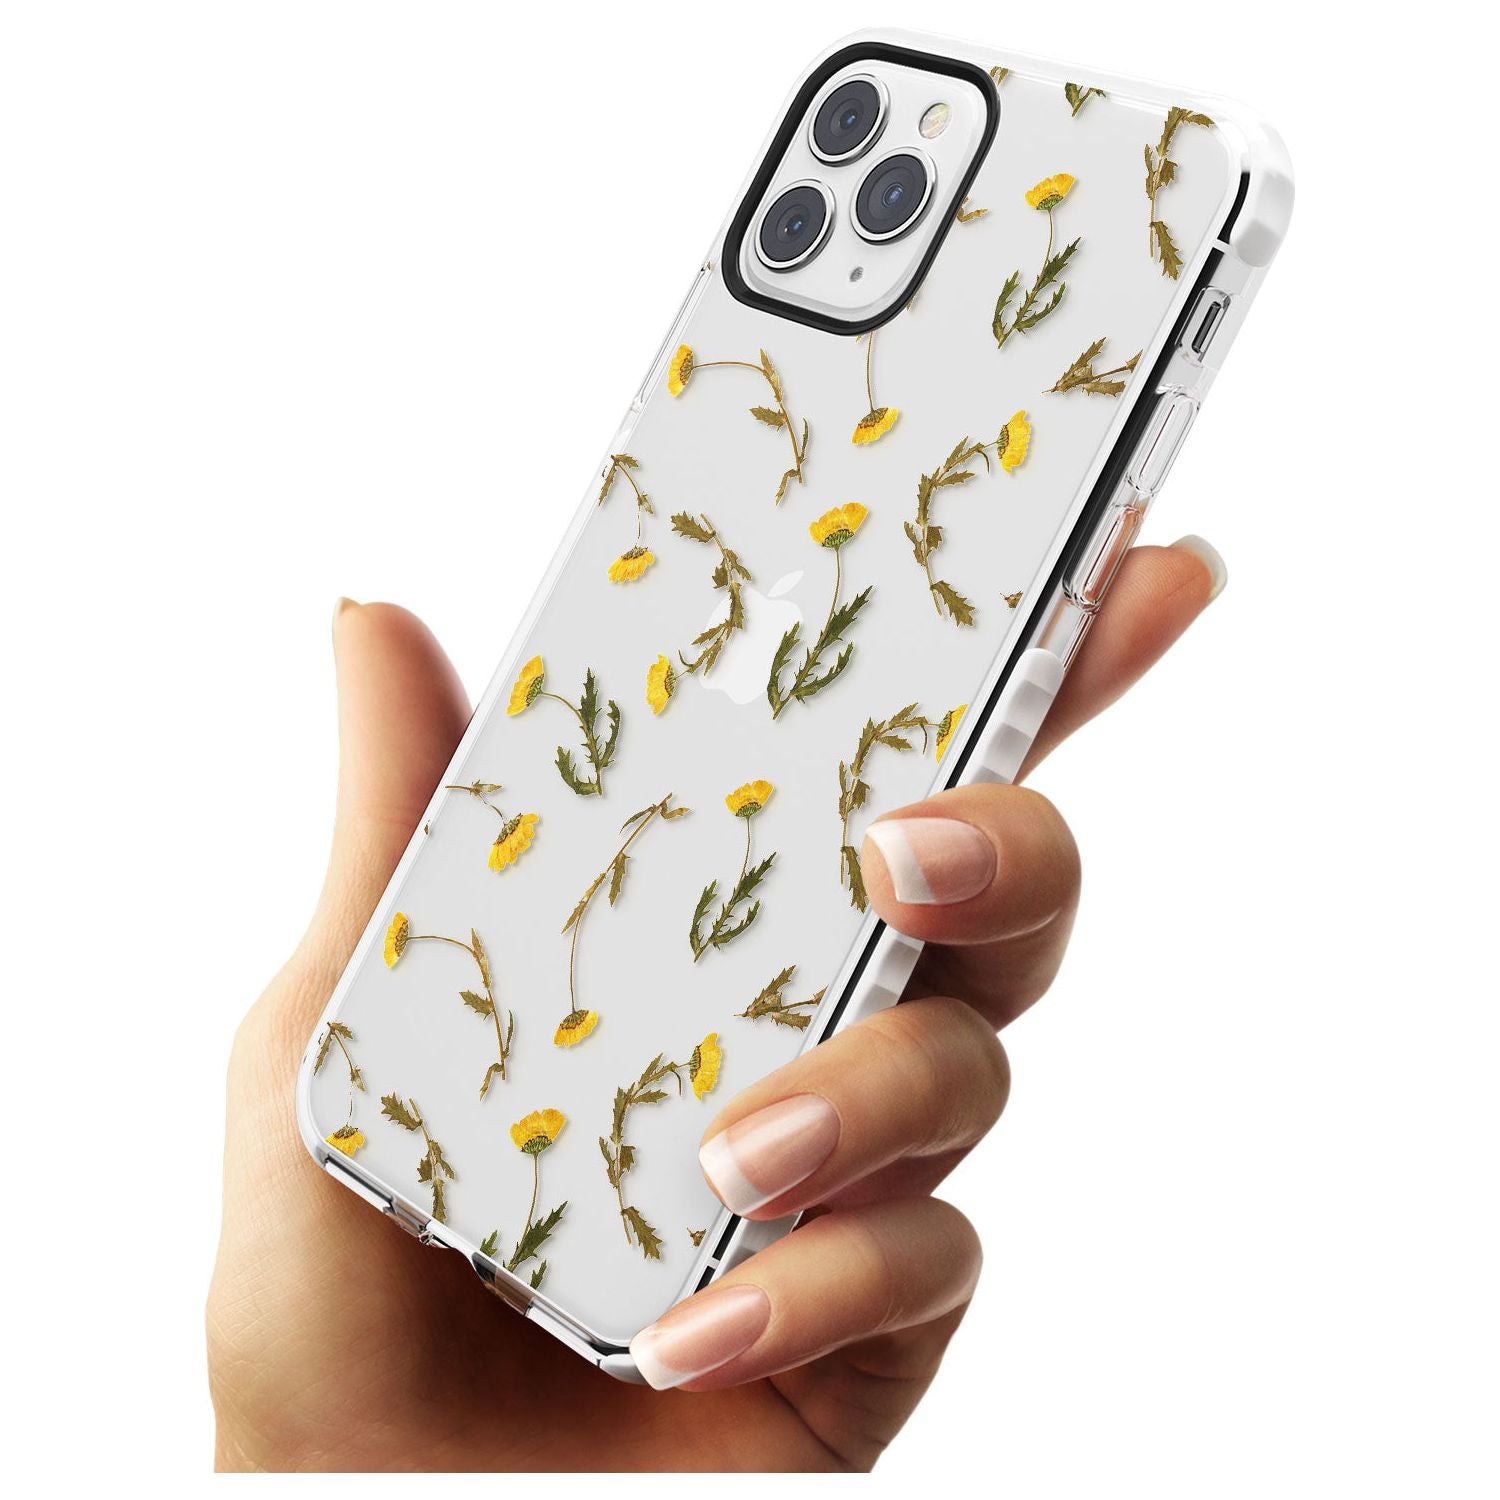 Long Stemmed Wildflowers - Dried Flower-Inspired Impact Phone Case for iPhone 11 Pro Max